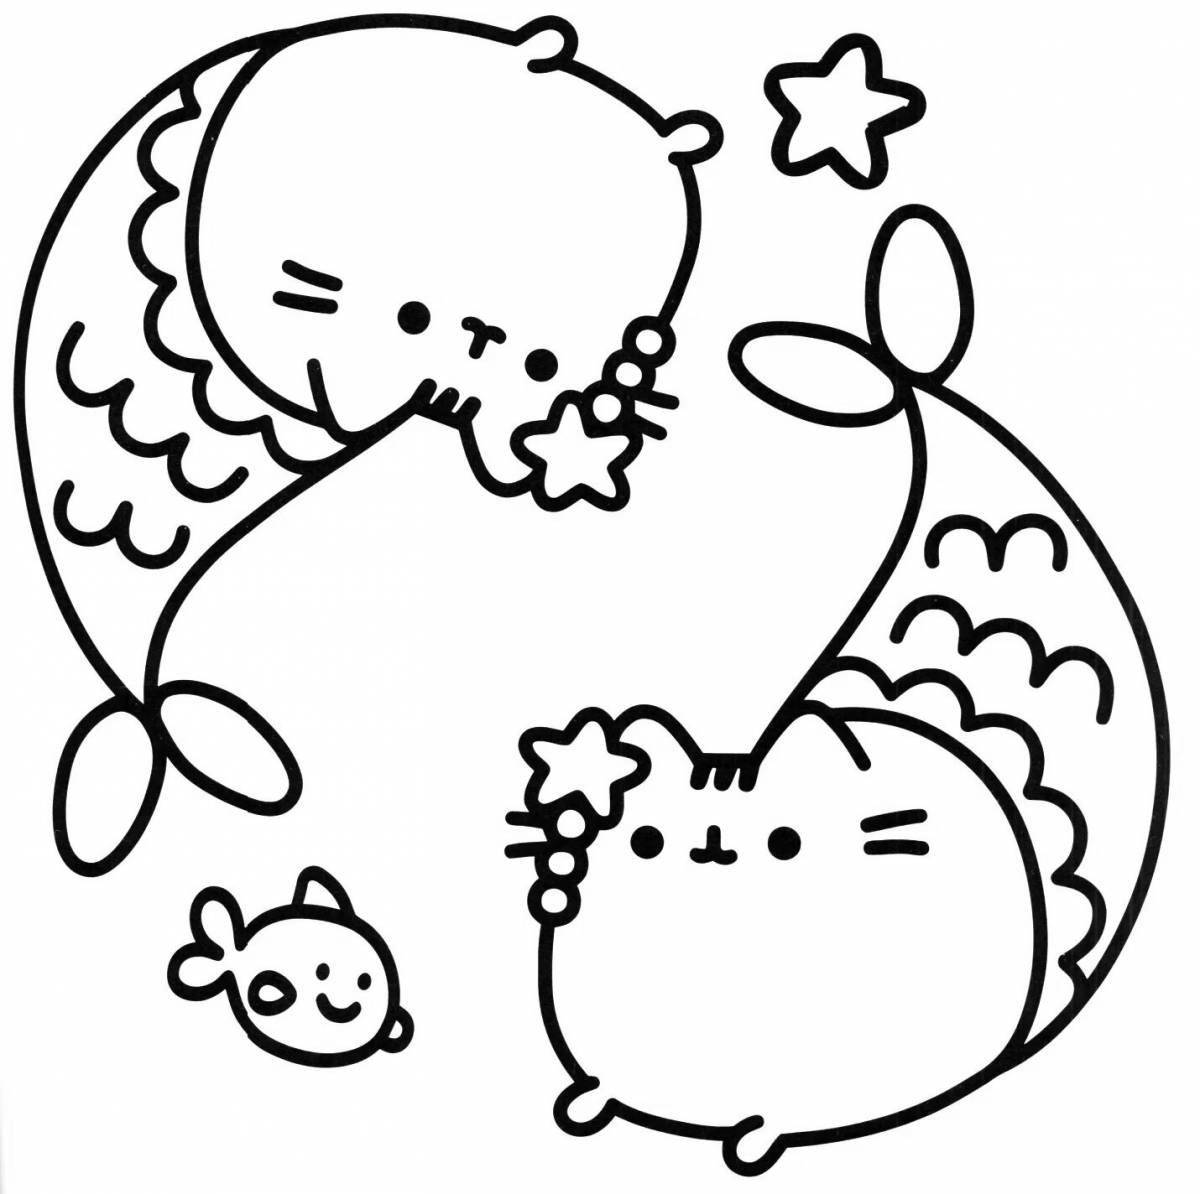 Pop cat holiday coloring page